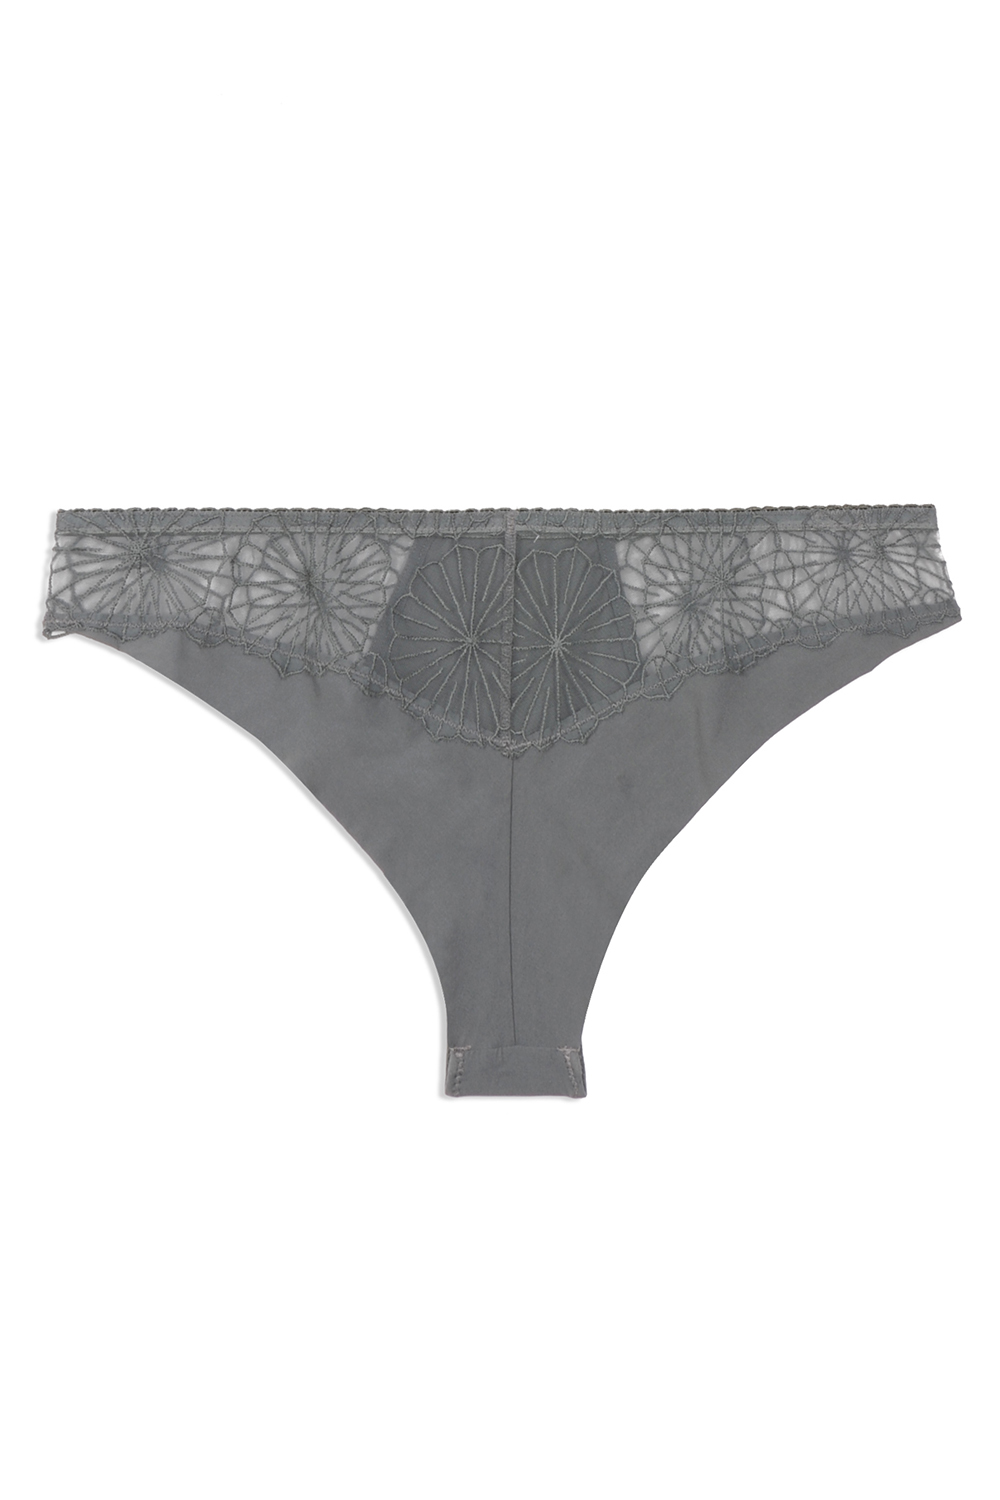 Microfiber and Lace Cheeky Panty - Bold peonies